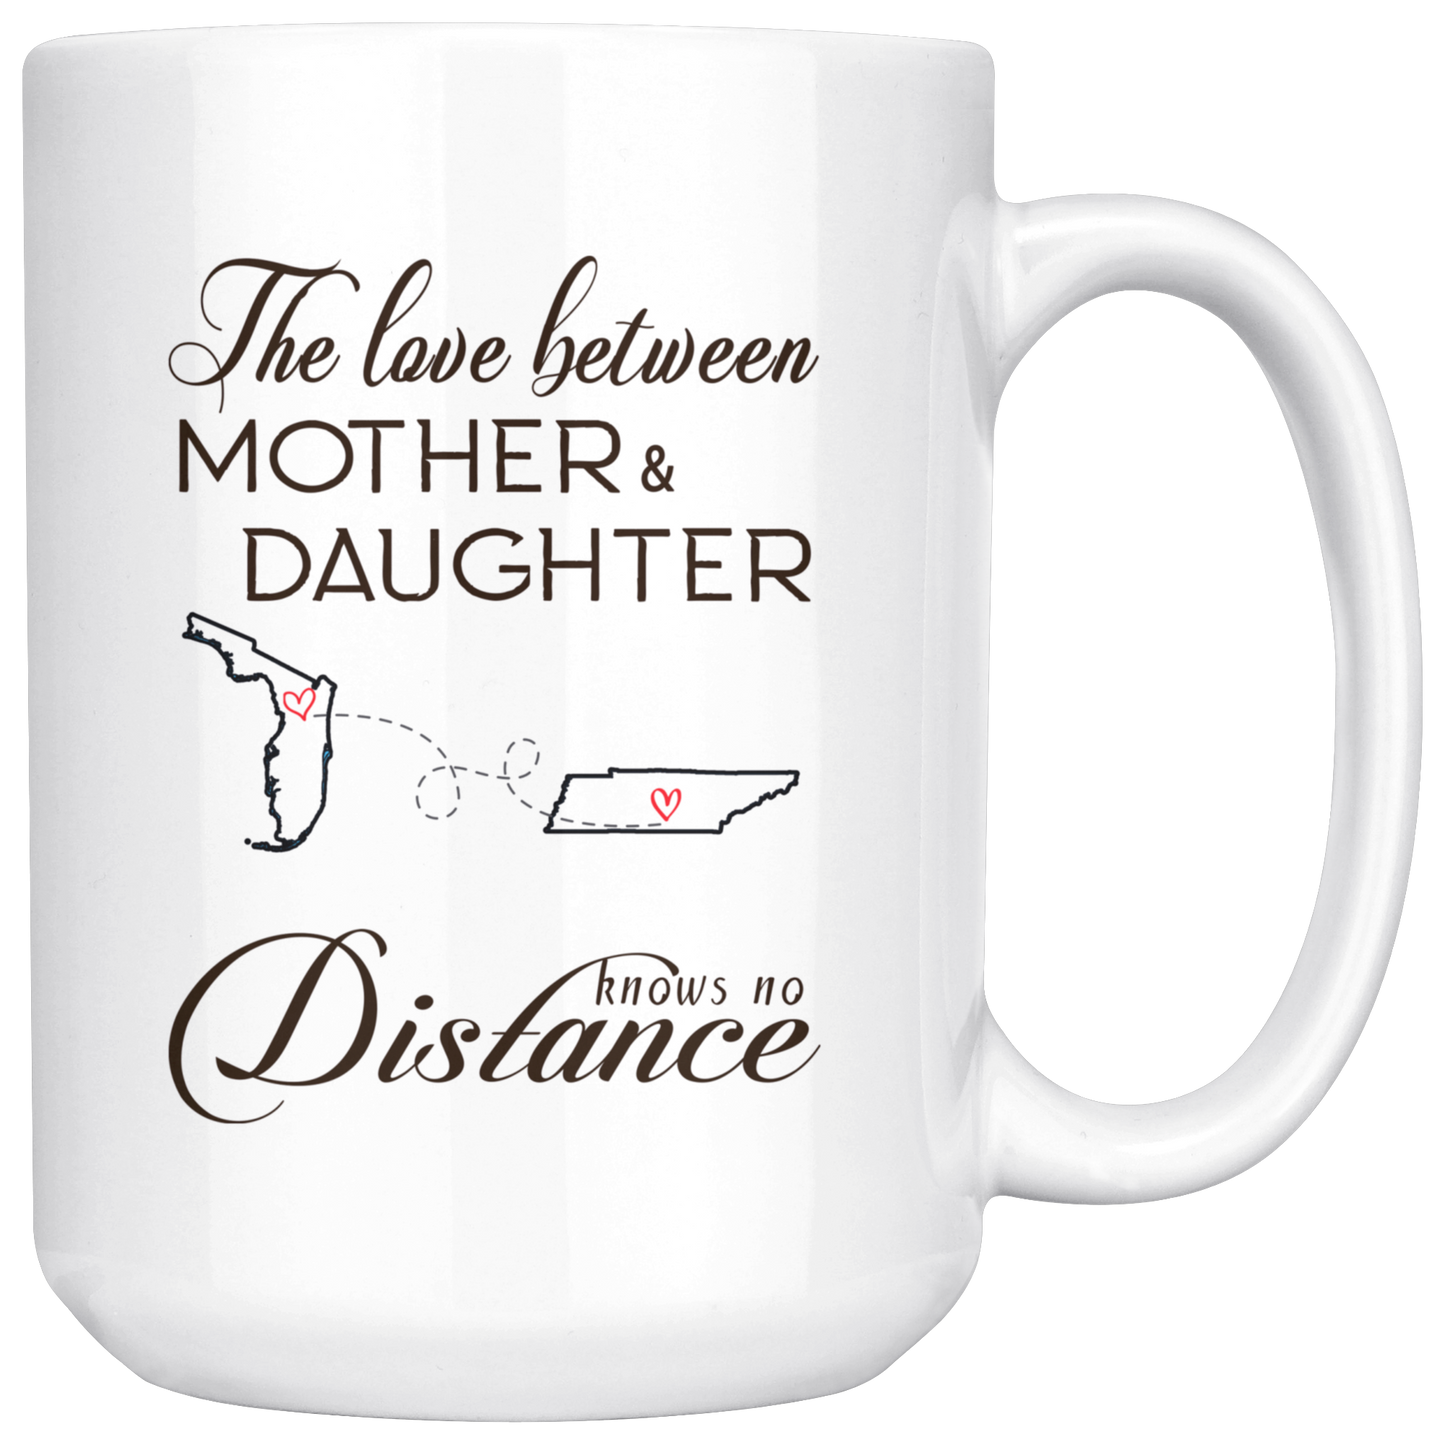 ND20635671-sp-24193 - [ Florida | Tennessee ]Long Distance Mug 15 oz Florida Tennessee - The Love Between